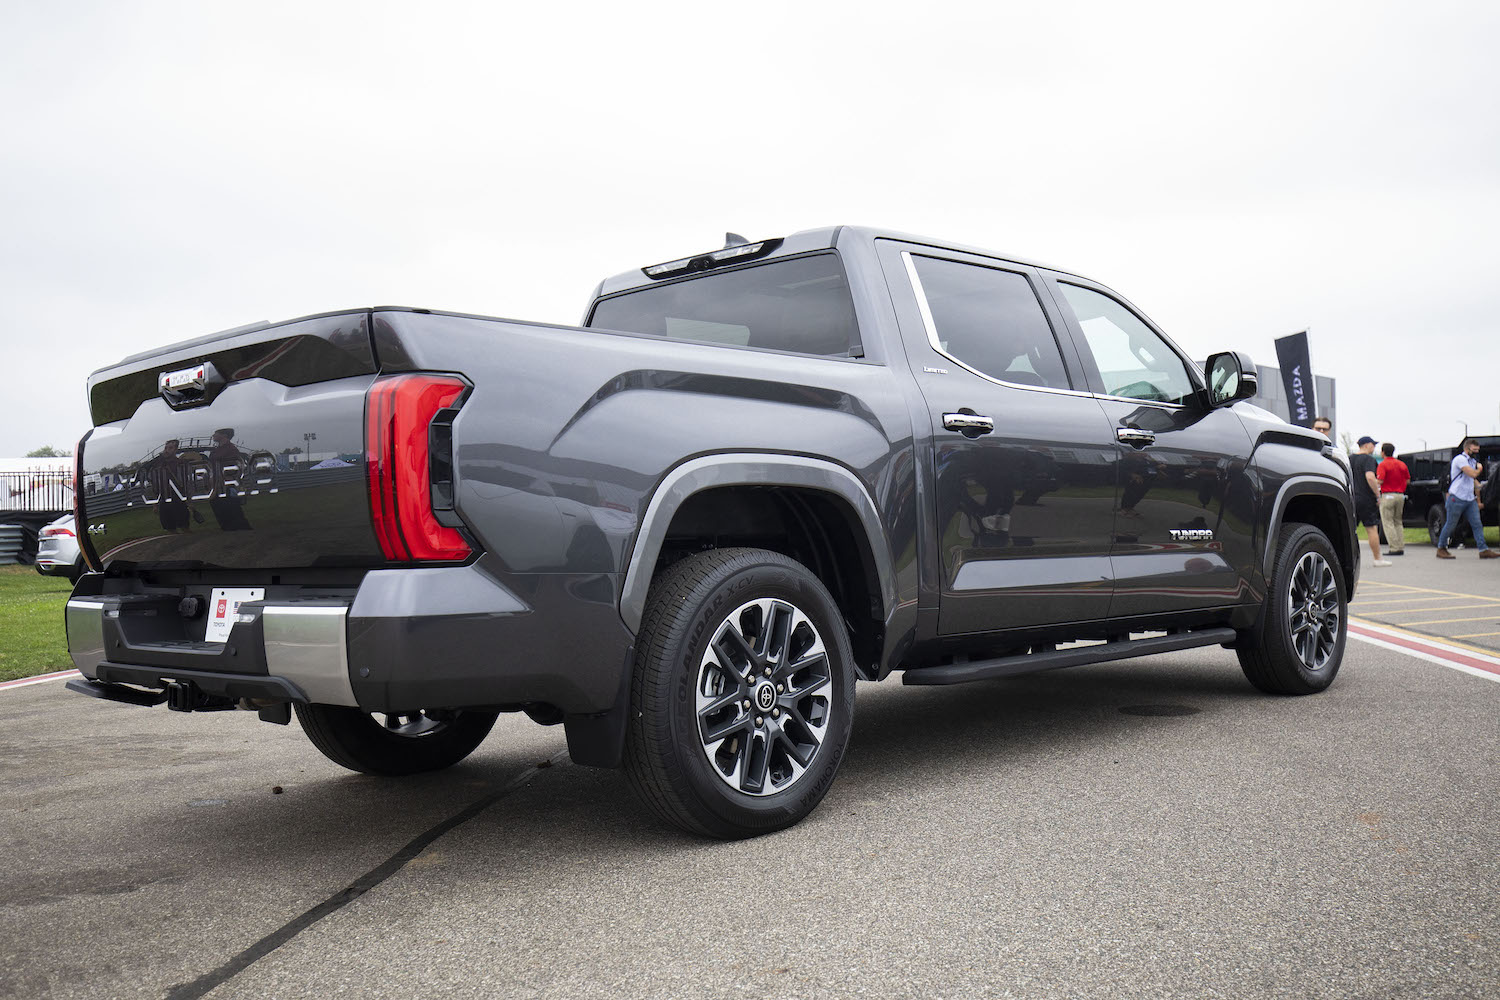 This is a photo of a 2022 Toyota Tundra at a track day. Will The Leaked 2022 Toyota Tundra Capstone Be The Lexus Of Trucks? | Bill Pugliano/Getty Images